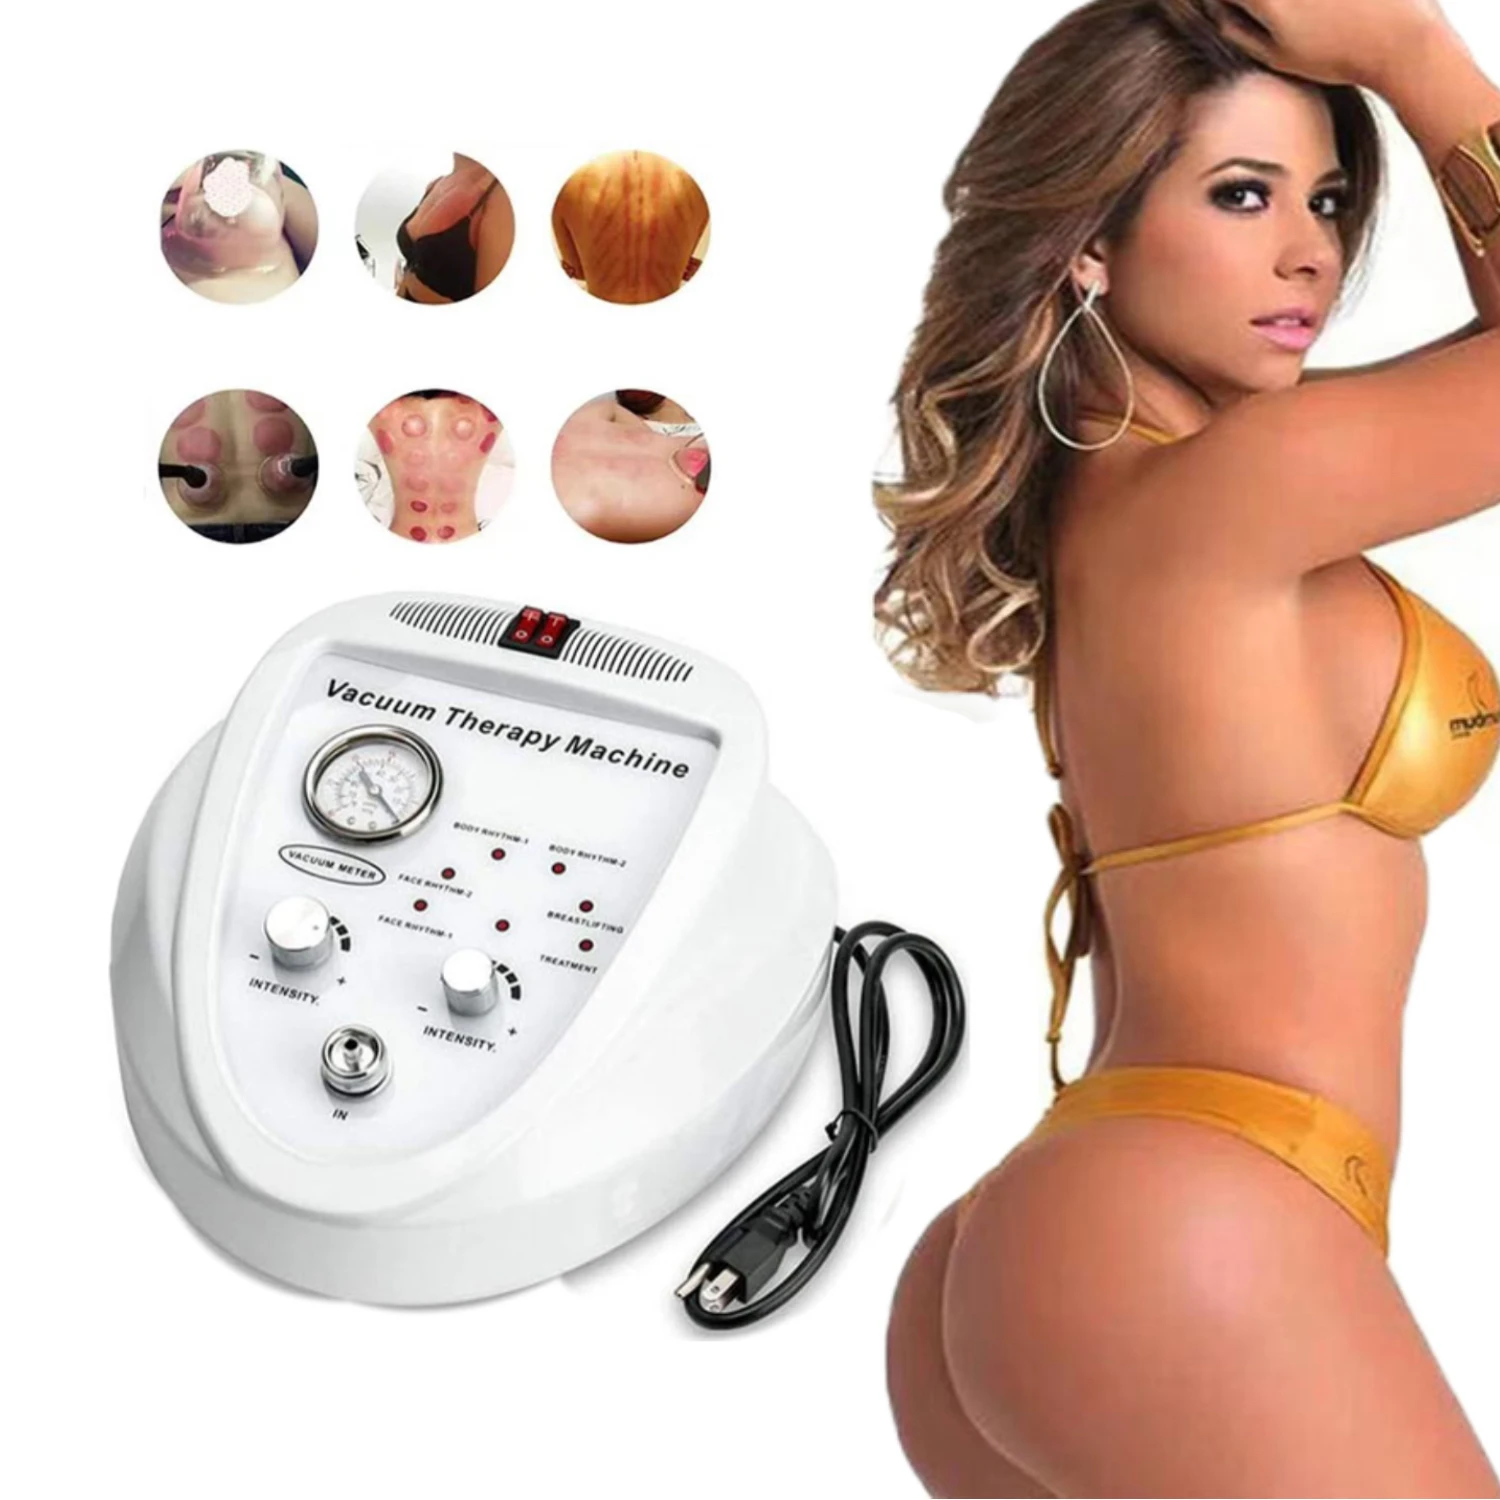 30 Cup Buttock Vacuum Vacuum Therapy Buttocks Machine For Enhanced